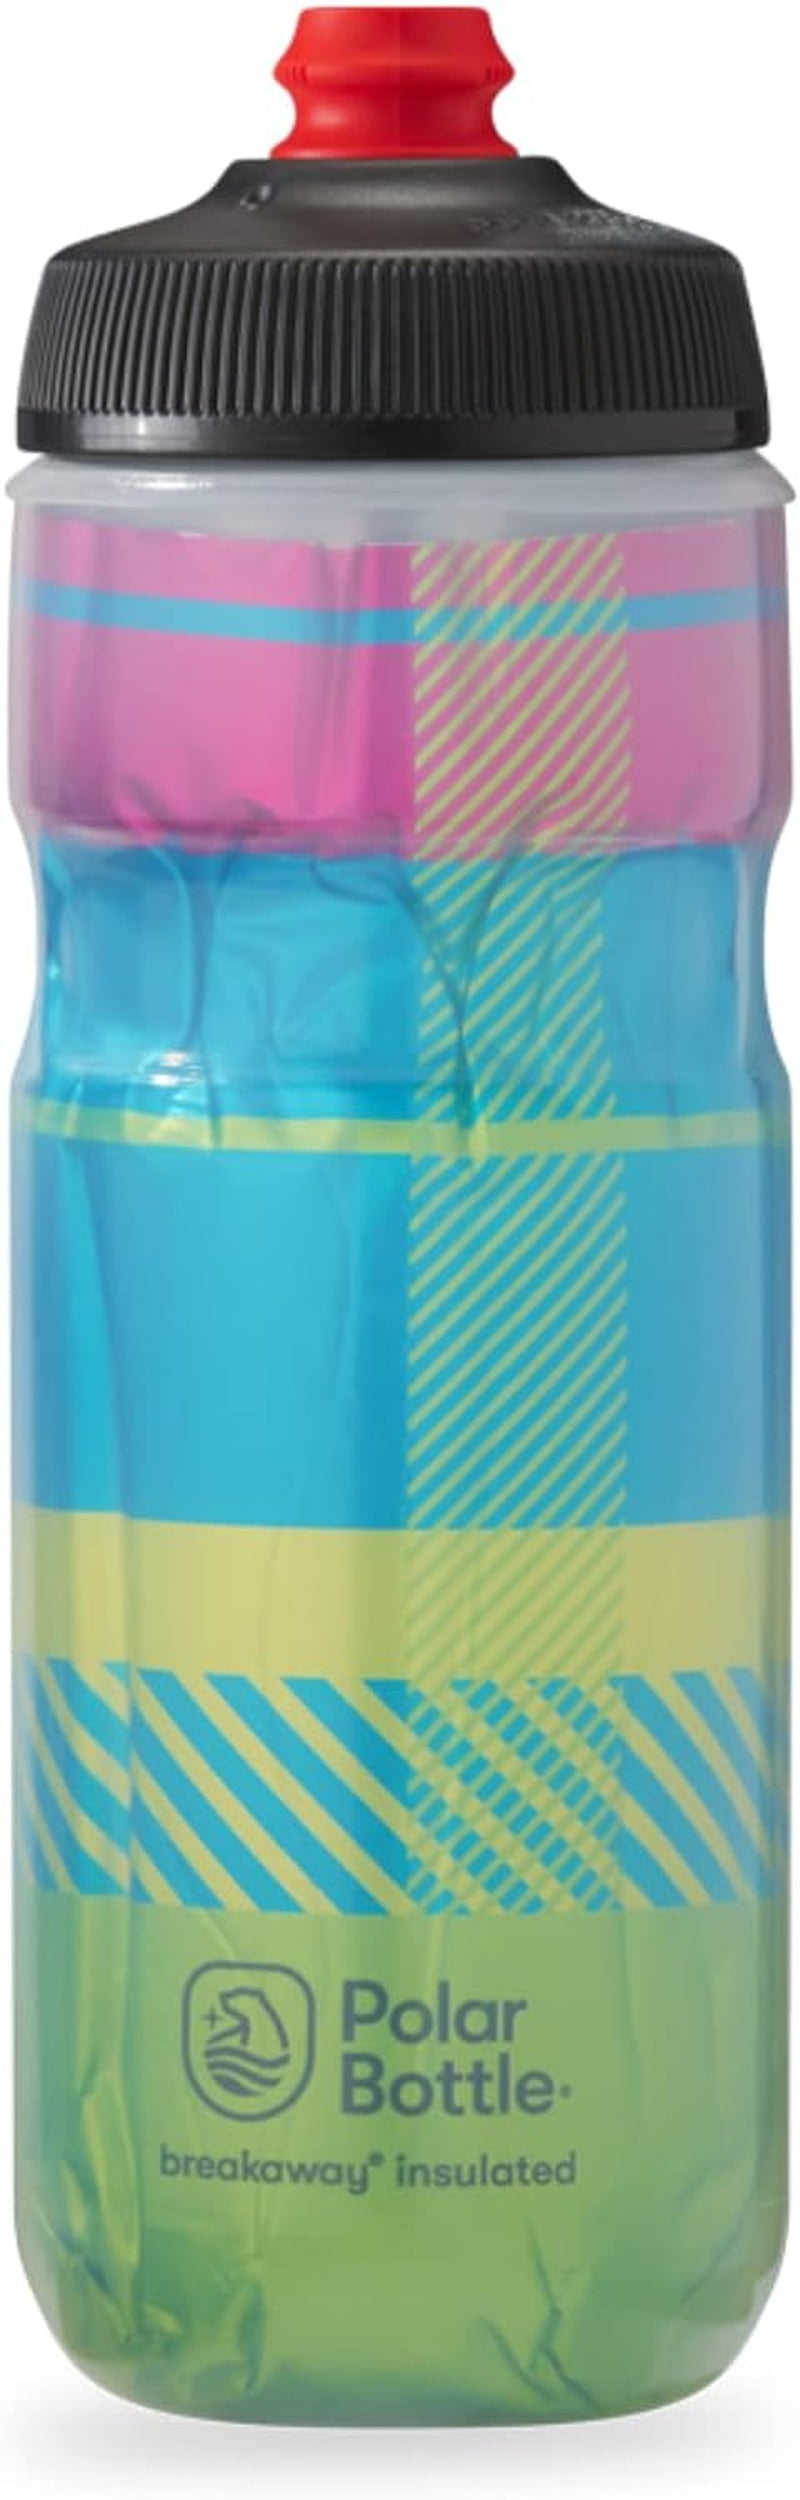 Breakaway Insulated Water Bottle - BPA Free, Cycling & Sports Squeeze Bottle (Bolt - Charcoal, 20 Oz) - 2 Pack